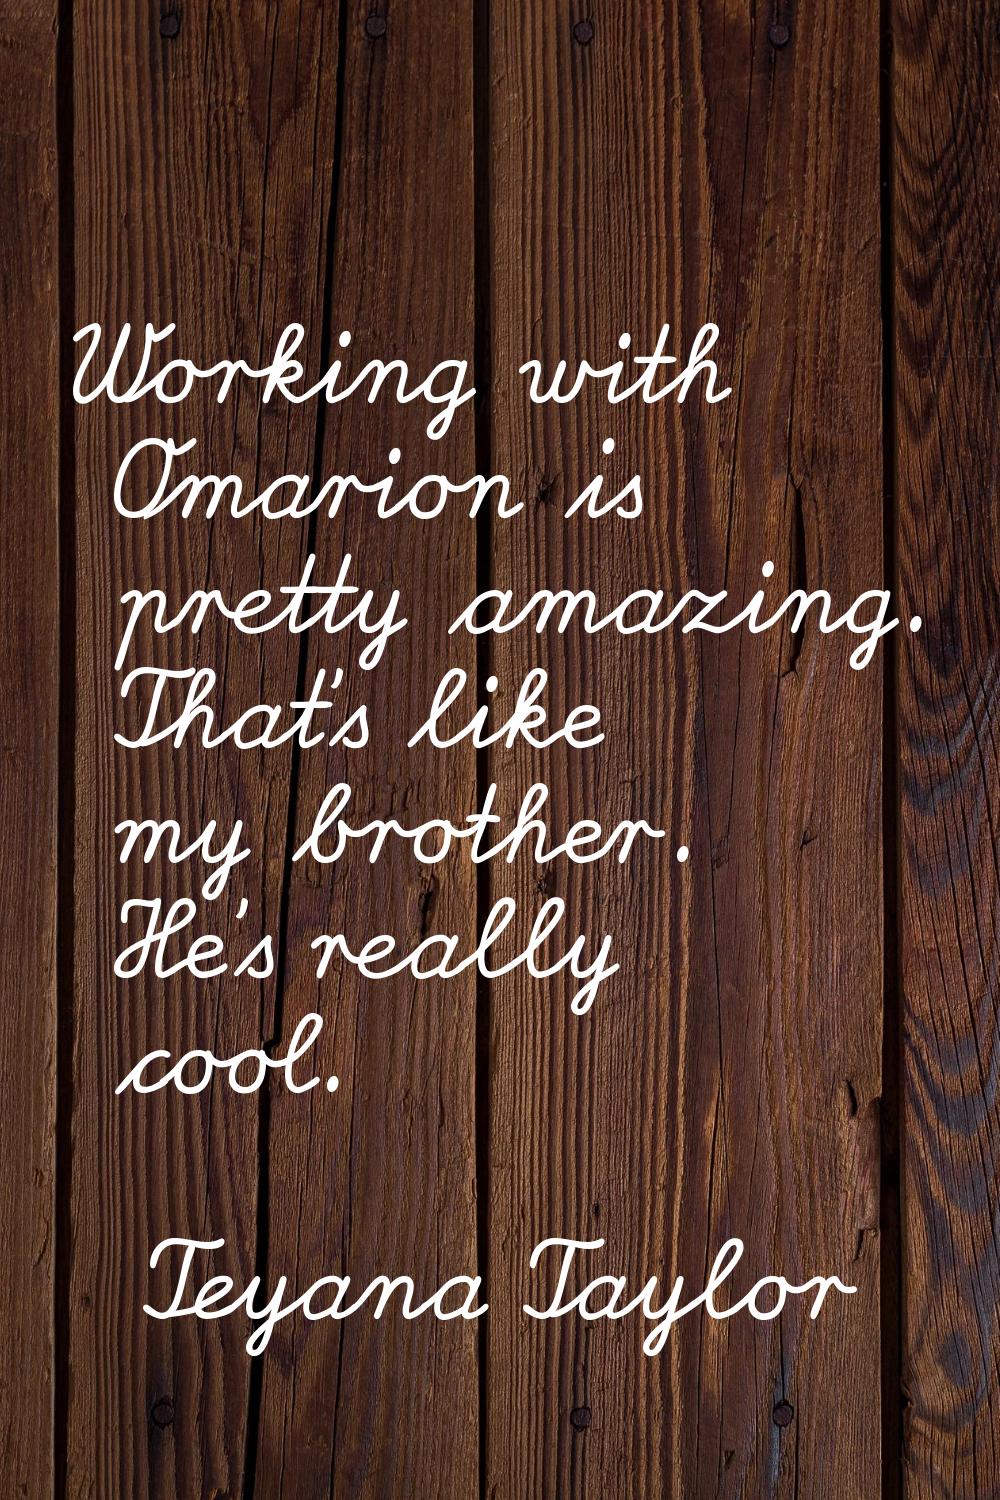 Working with Omarion is pretty amazing. That's like my brother. He's really cool.